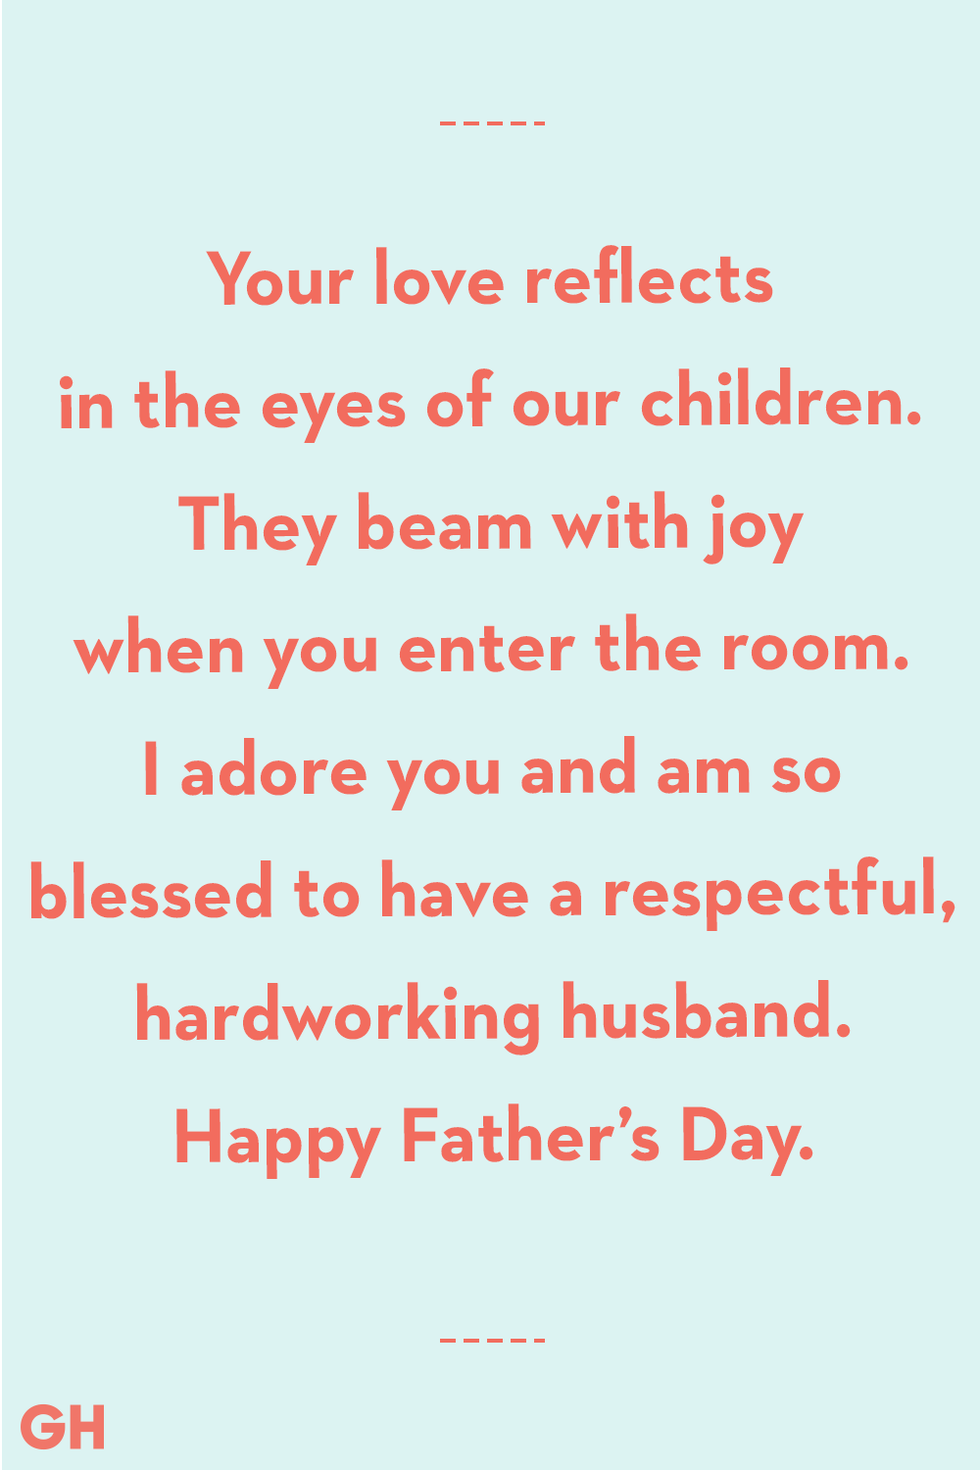 Happy Fathers Day Messages From Wife To Husband